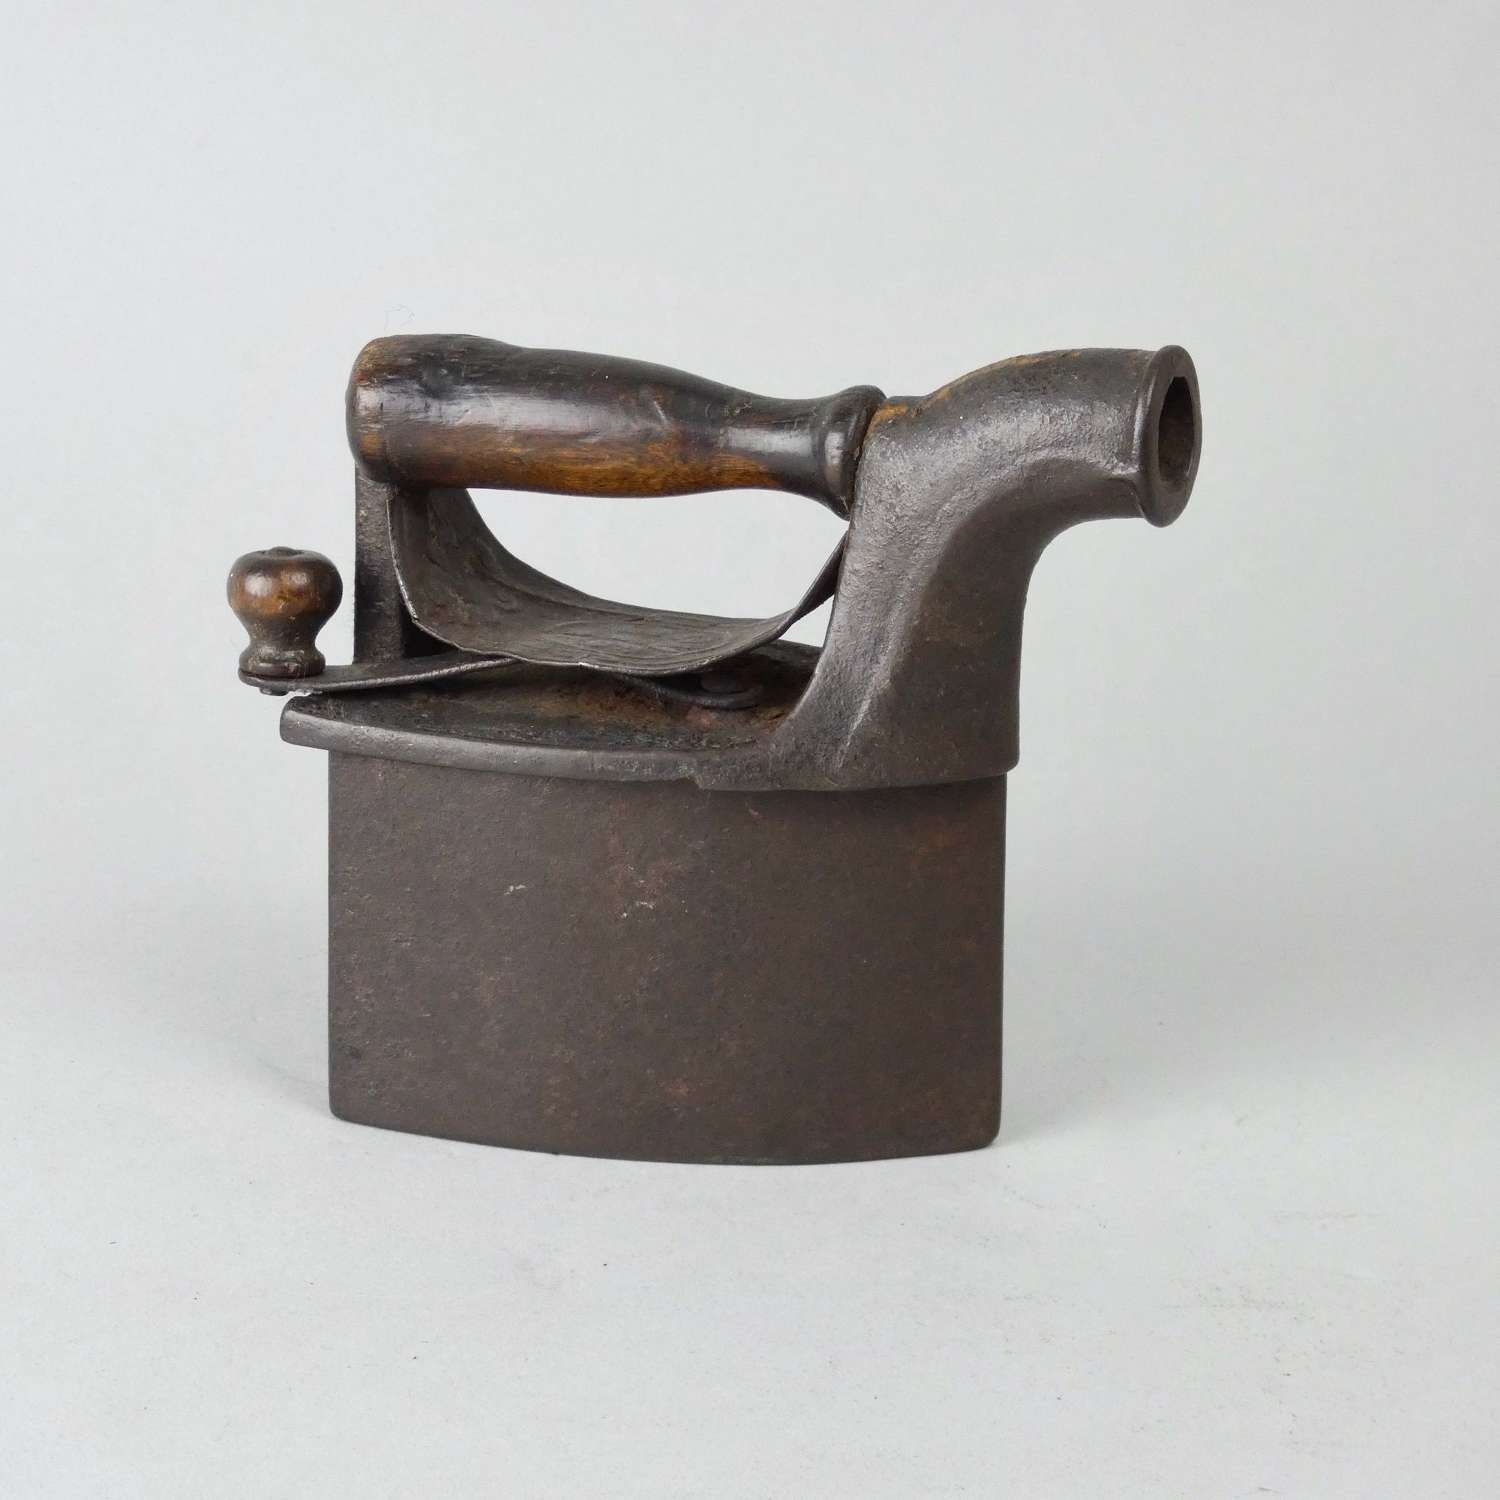 Small, Victorian charcoal iron